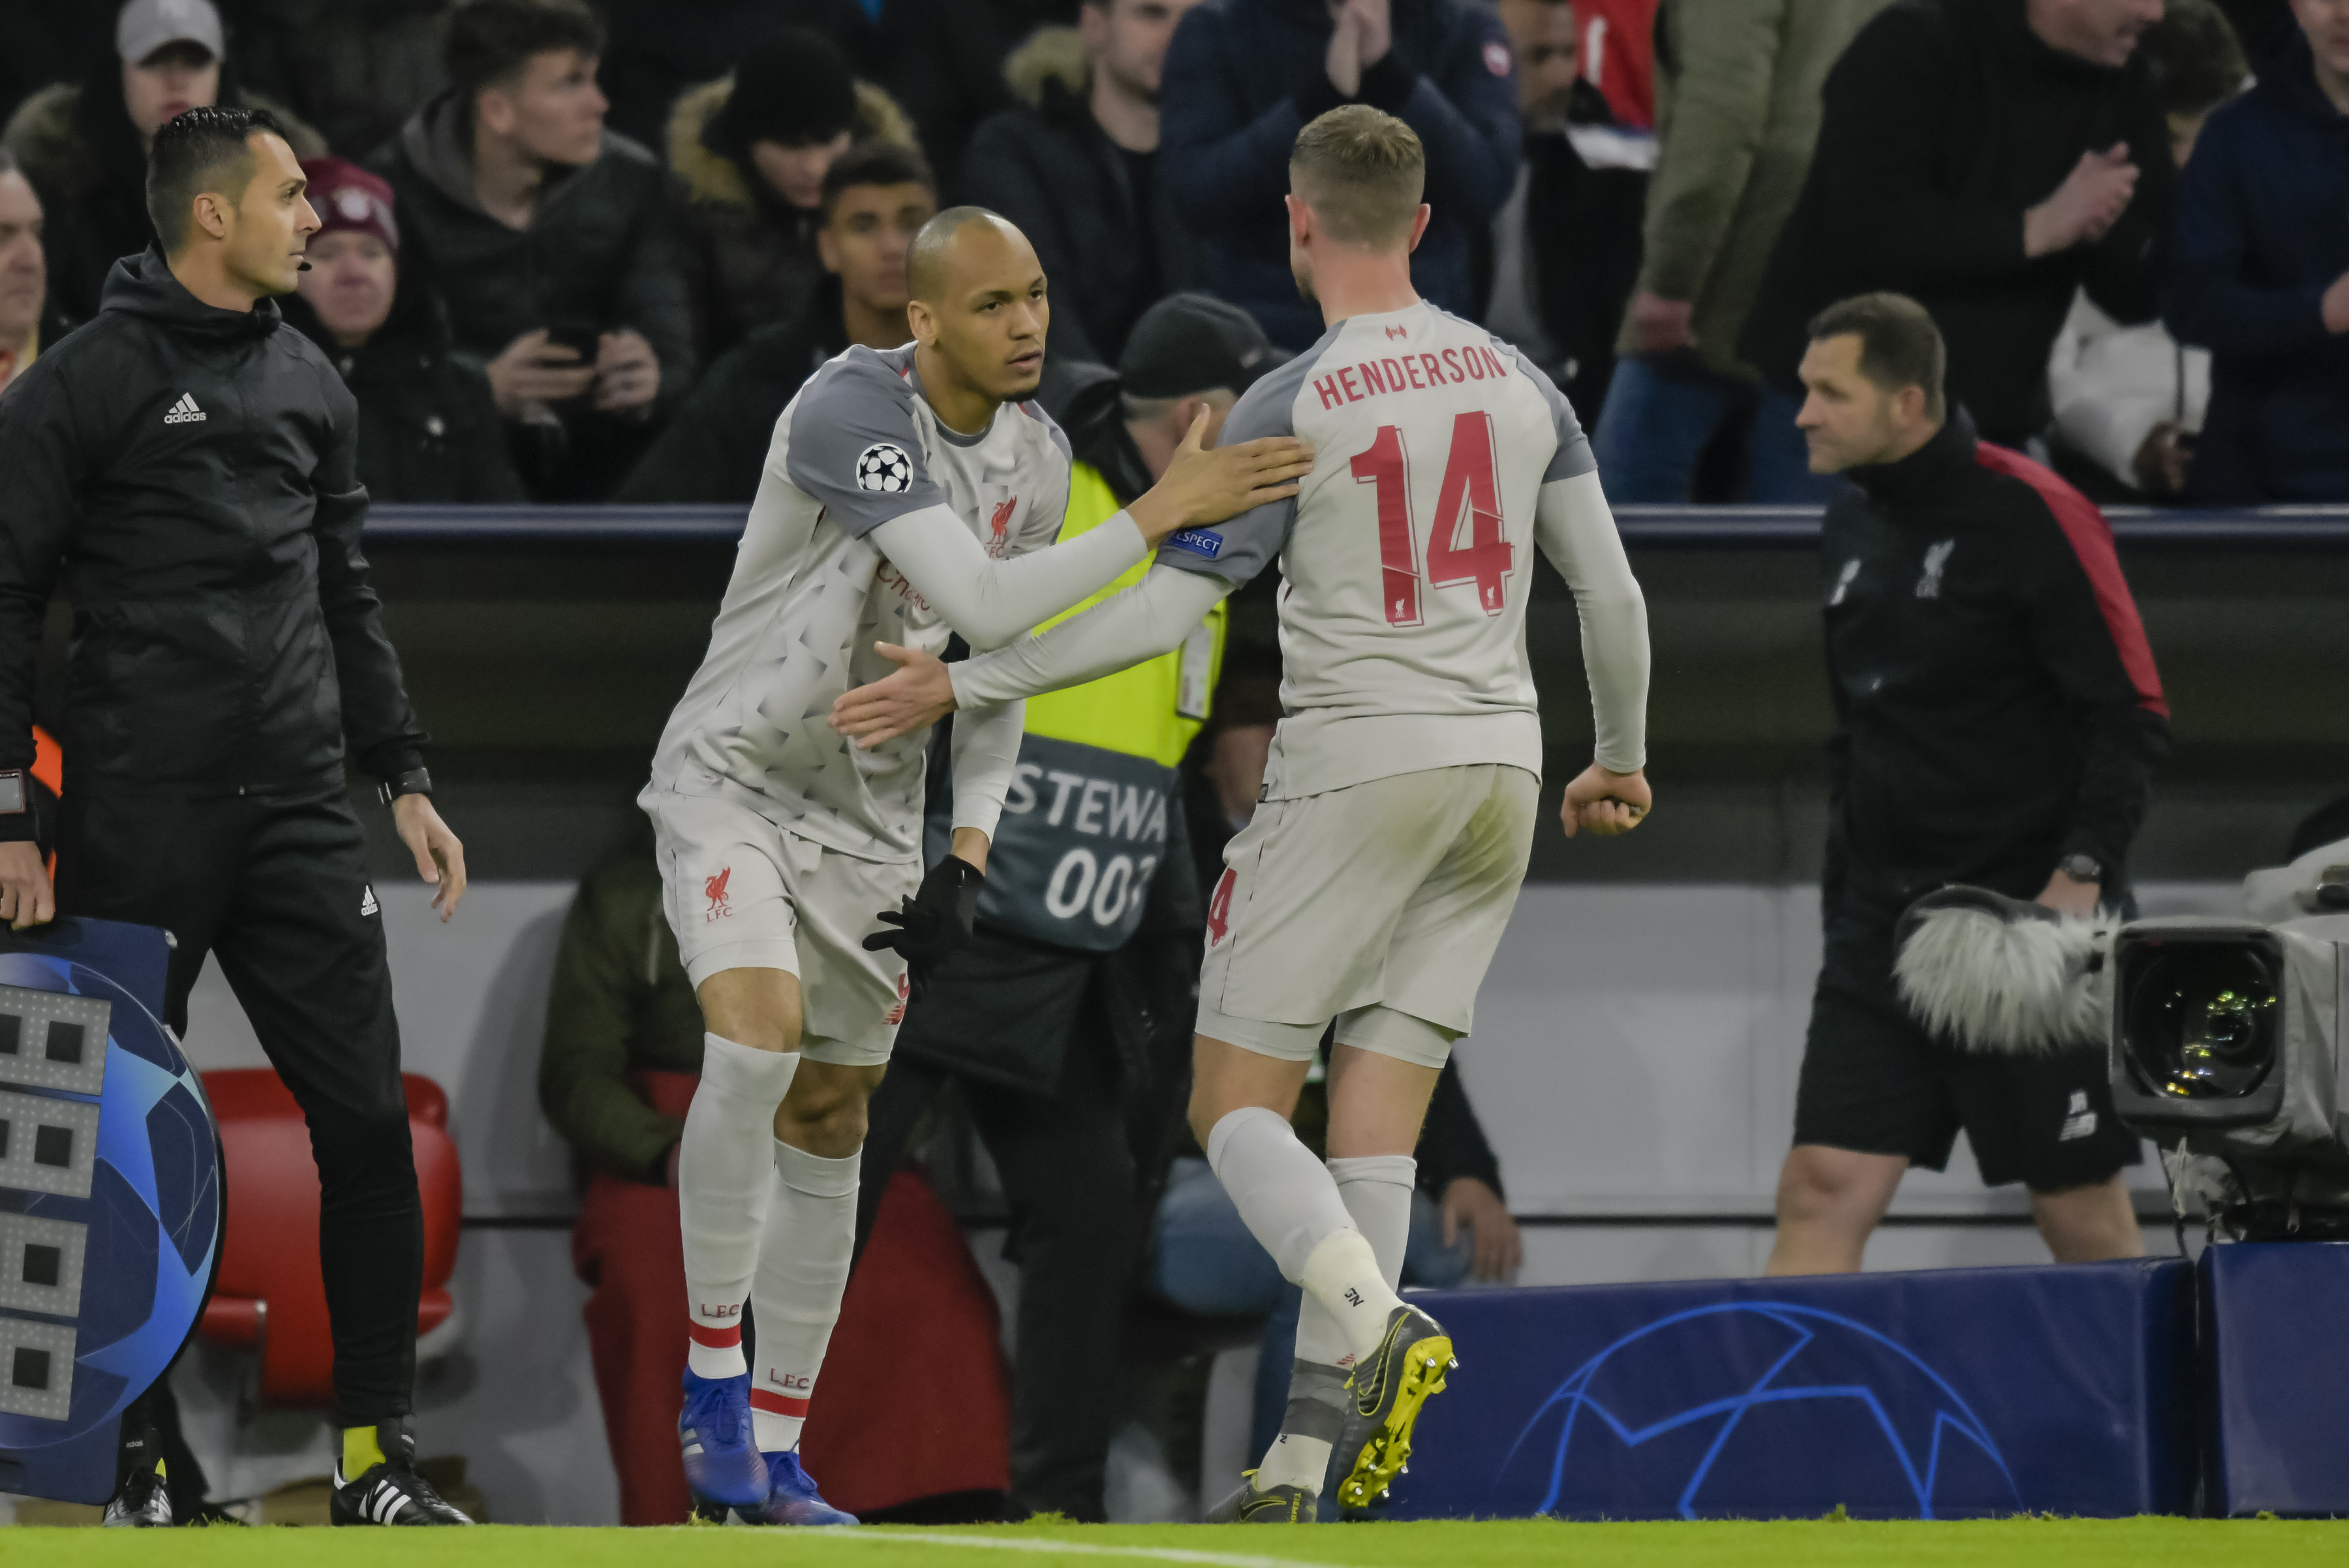 Liverpool's Brazilian midfielder Fabinho comes on for Liverpool's injured English midfielder Jordan Henderson (R) during the UEFA Champions League, last 16, second leg football match Bayern Munich v Liverpool in Munich, southern Germany, on March 13, 2019. (Photo by GUENTER SCHIFFMANN / AFP)        (Photo credit should read GUENTER SCHIFFMANN/AFP/Getty Images)